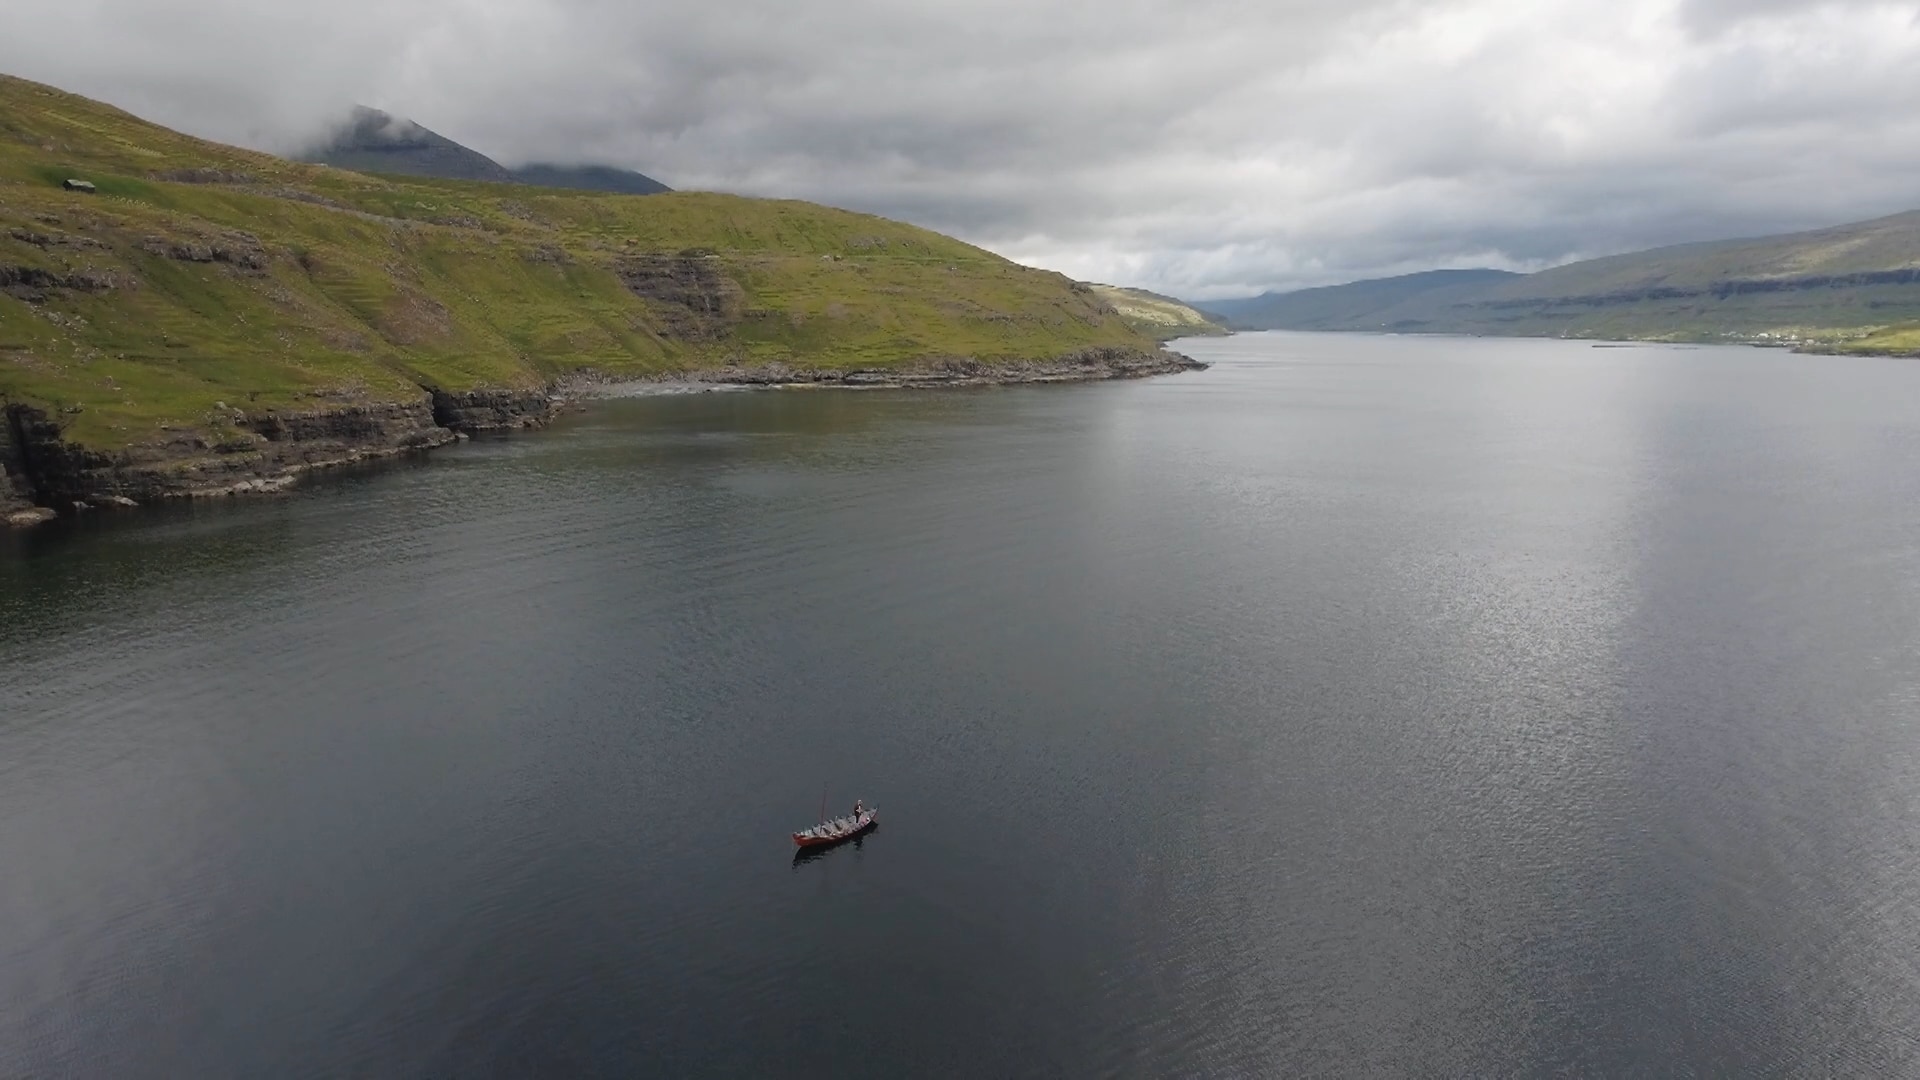 Nowhere in the Faroe Islands are you more than 5 kilometres from water.